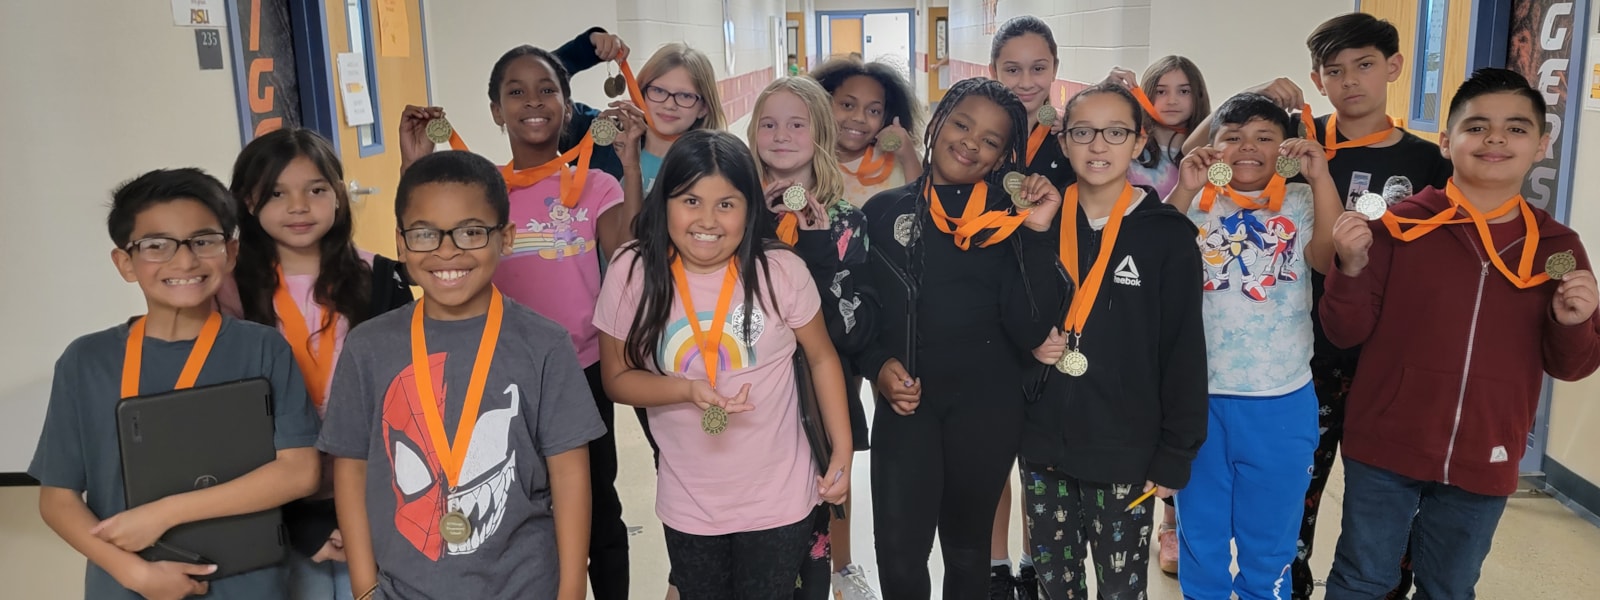 Students with tiger medals.